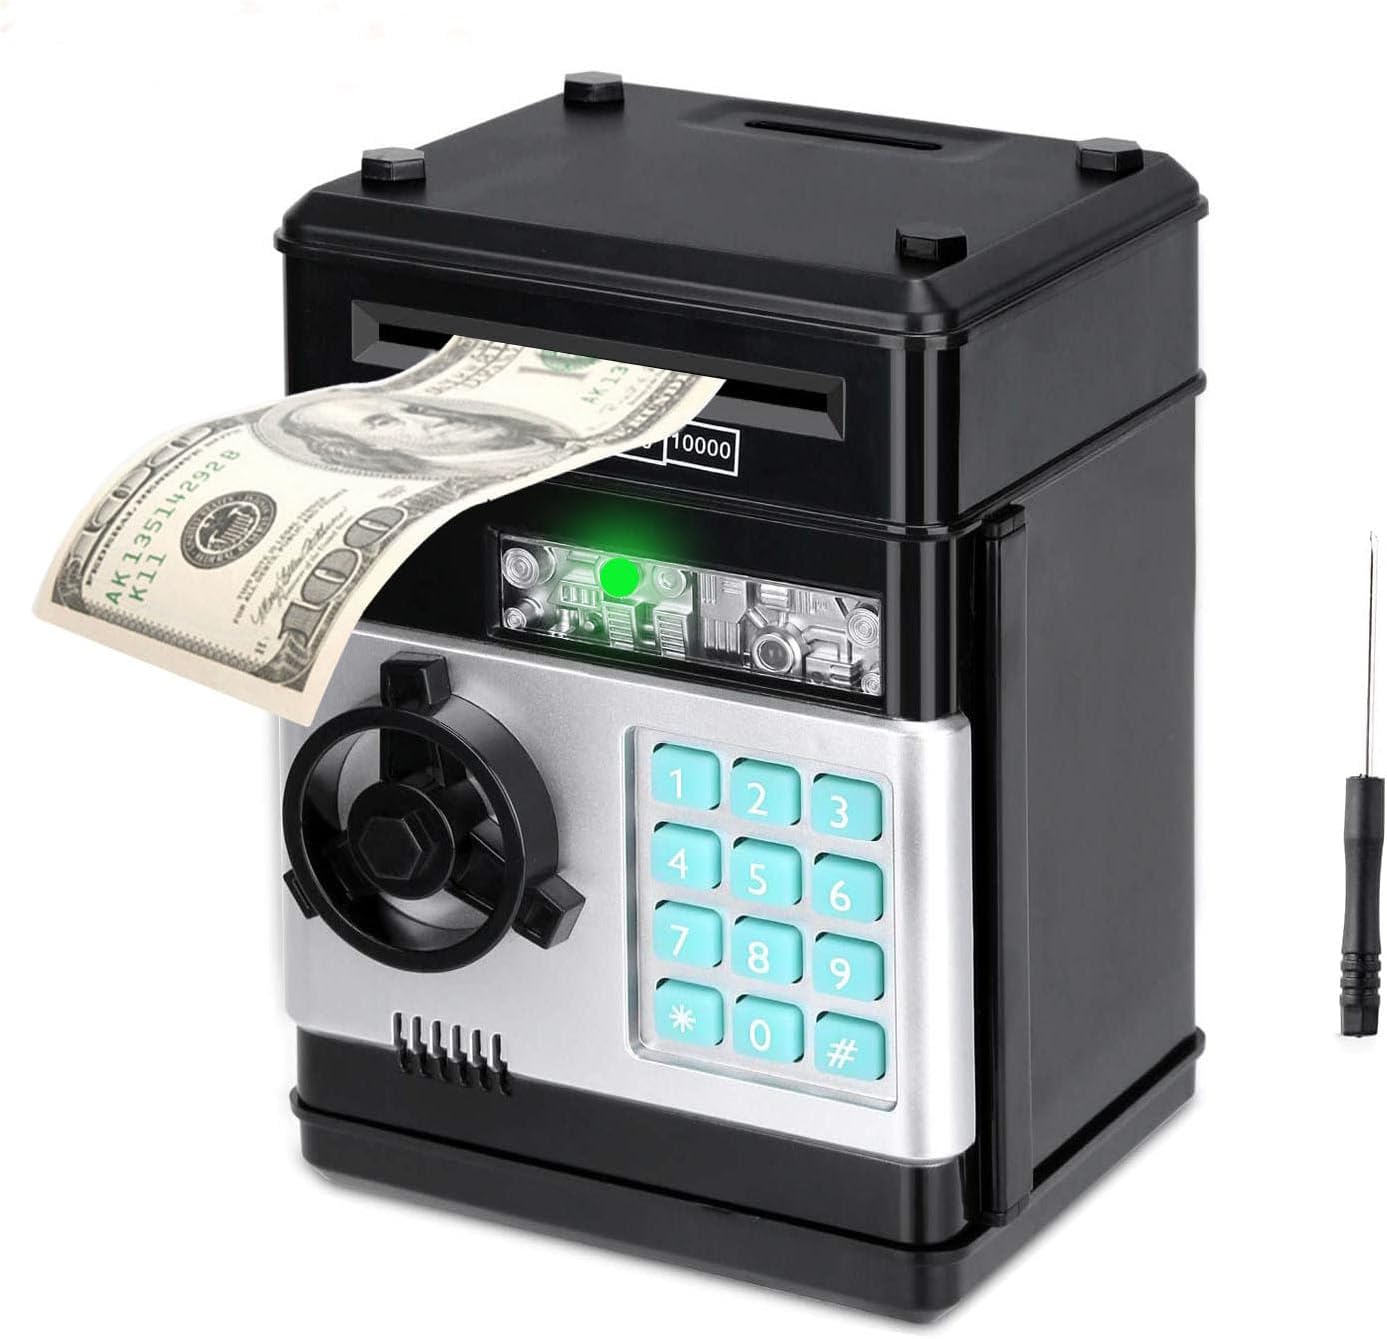 Piggy Bank,Electronic Piggy Bank for Kids,ATM Coin Bank with Safe Password,Money Saving Box for Boys Girls,Great Birthday Christmas Toy Gifts for 5 6 7 8 9 10 Year Old(Black)